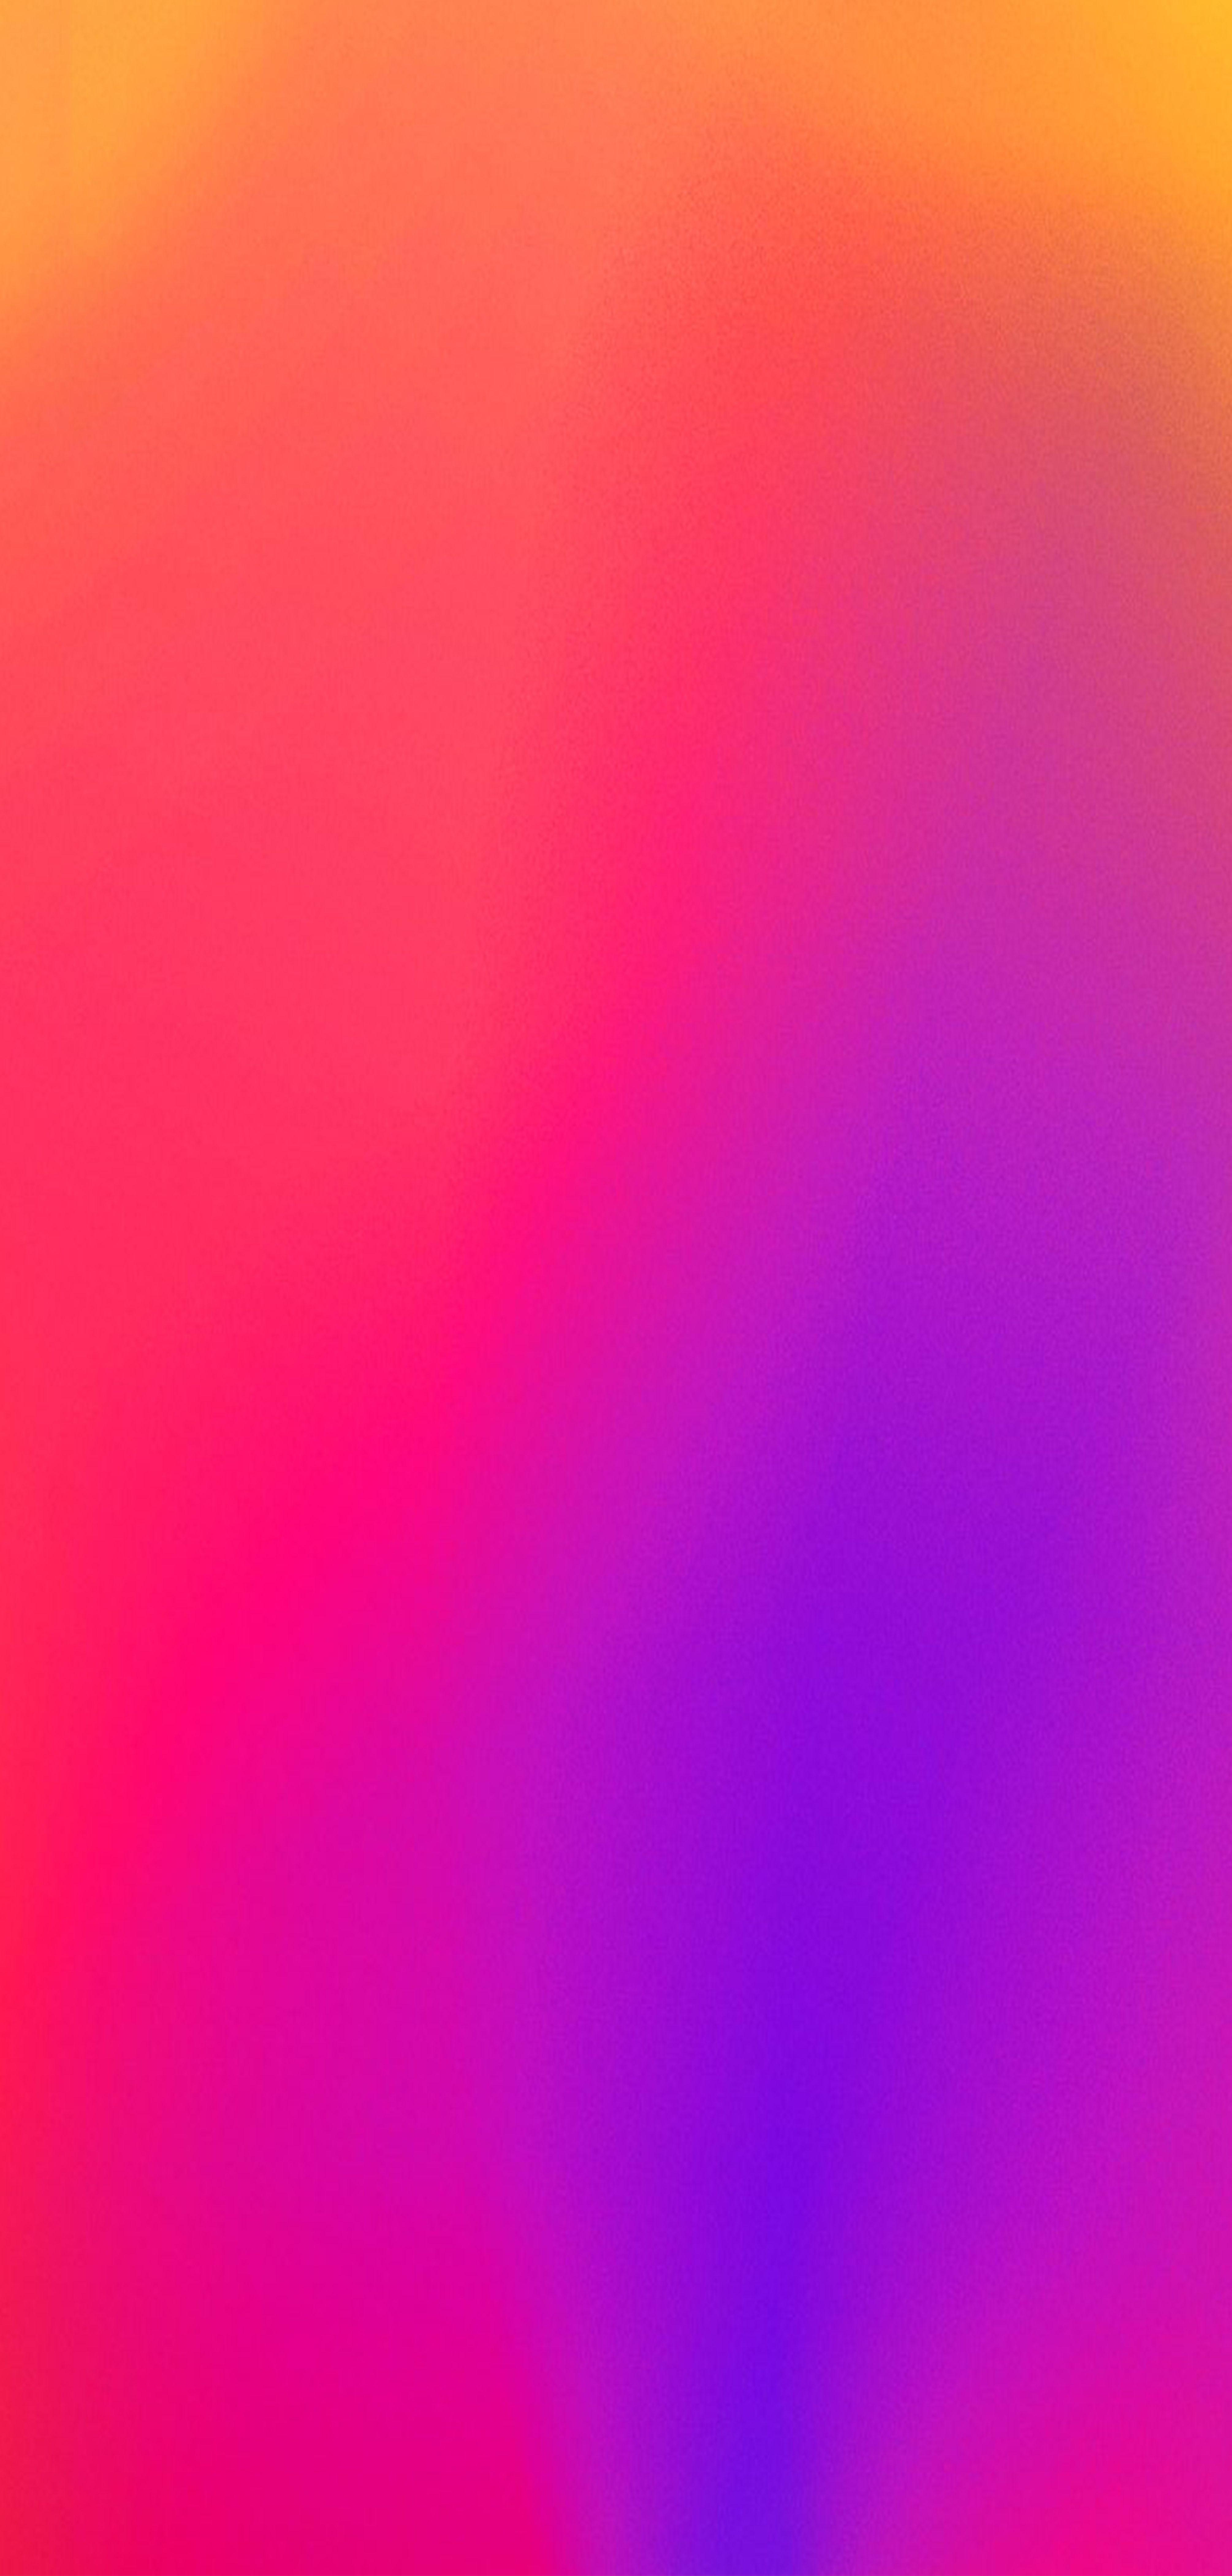 Best iPhone and Android Wallpaper: Vibrant Shapes & Gradients Background for iPhone and Android. iPhone wallpaper gradient, iPhone wallpaper, Pink iphone